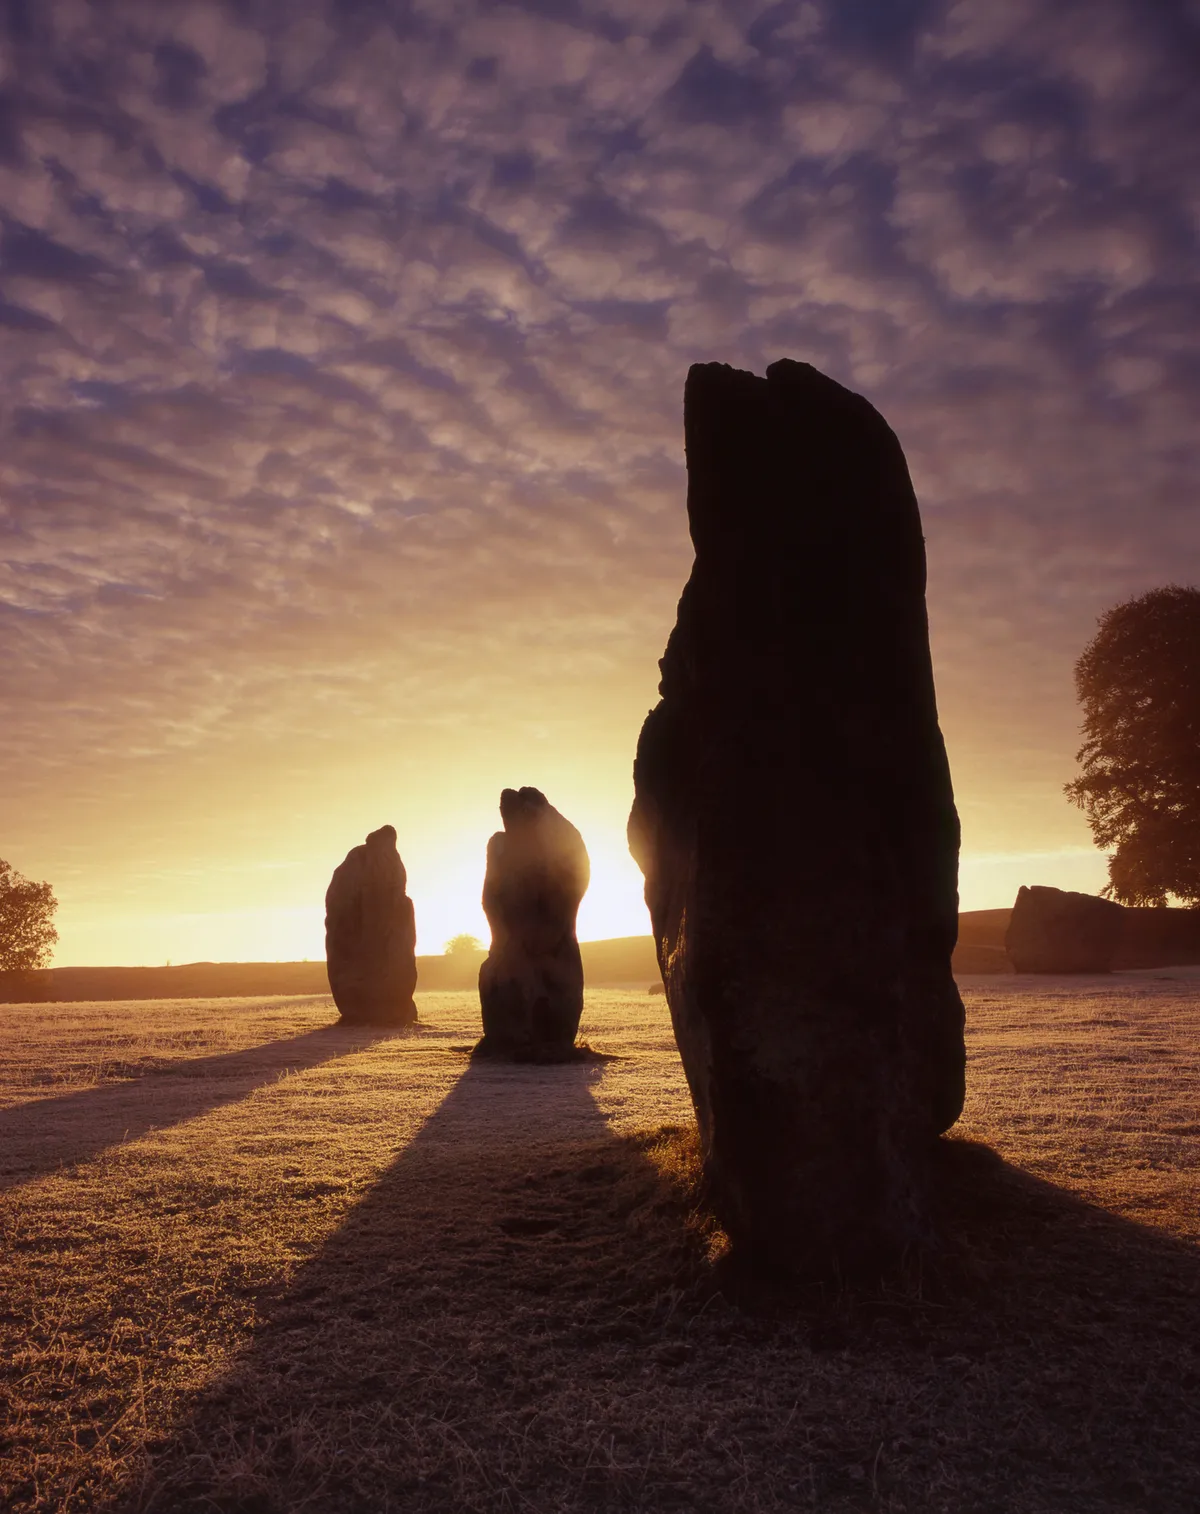 A dramatic sunrise behind the Standing Stones at Avebury in Wiltshire.